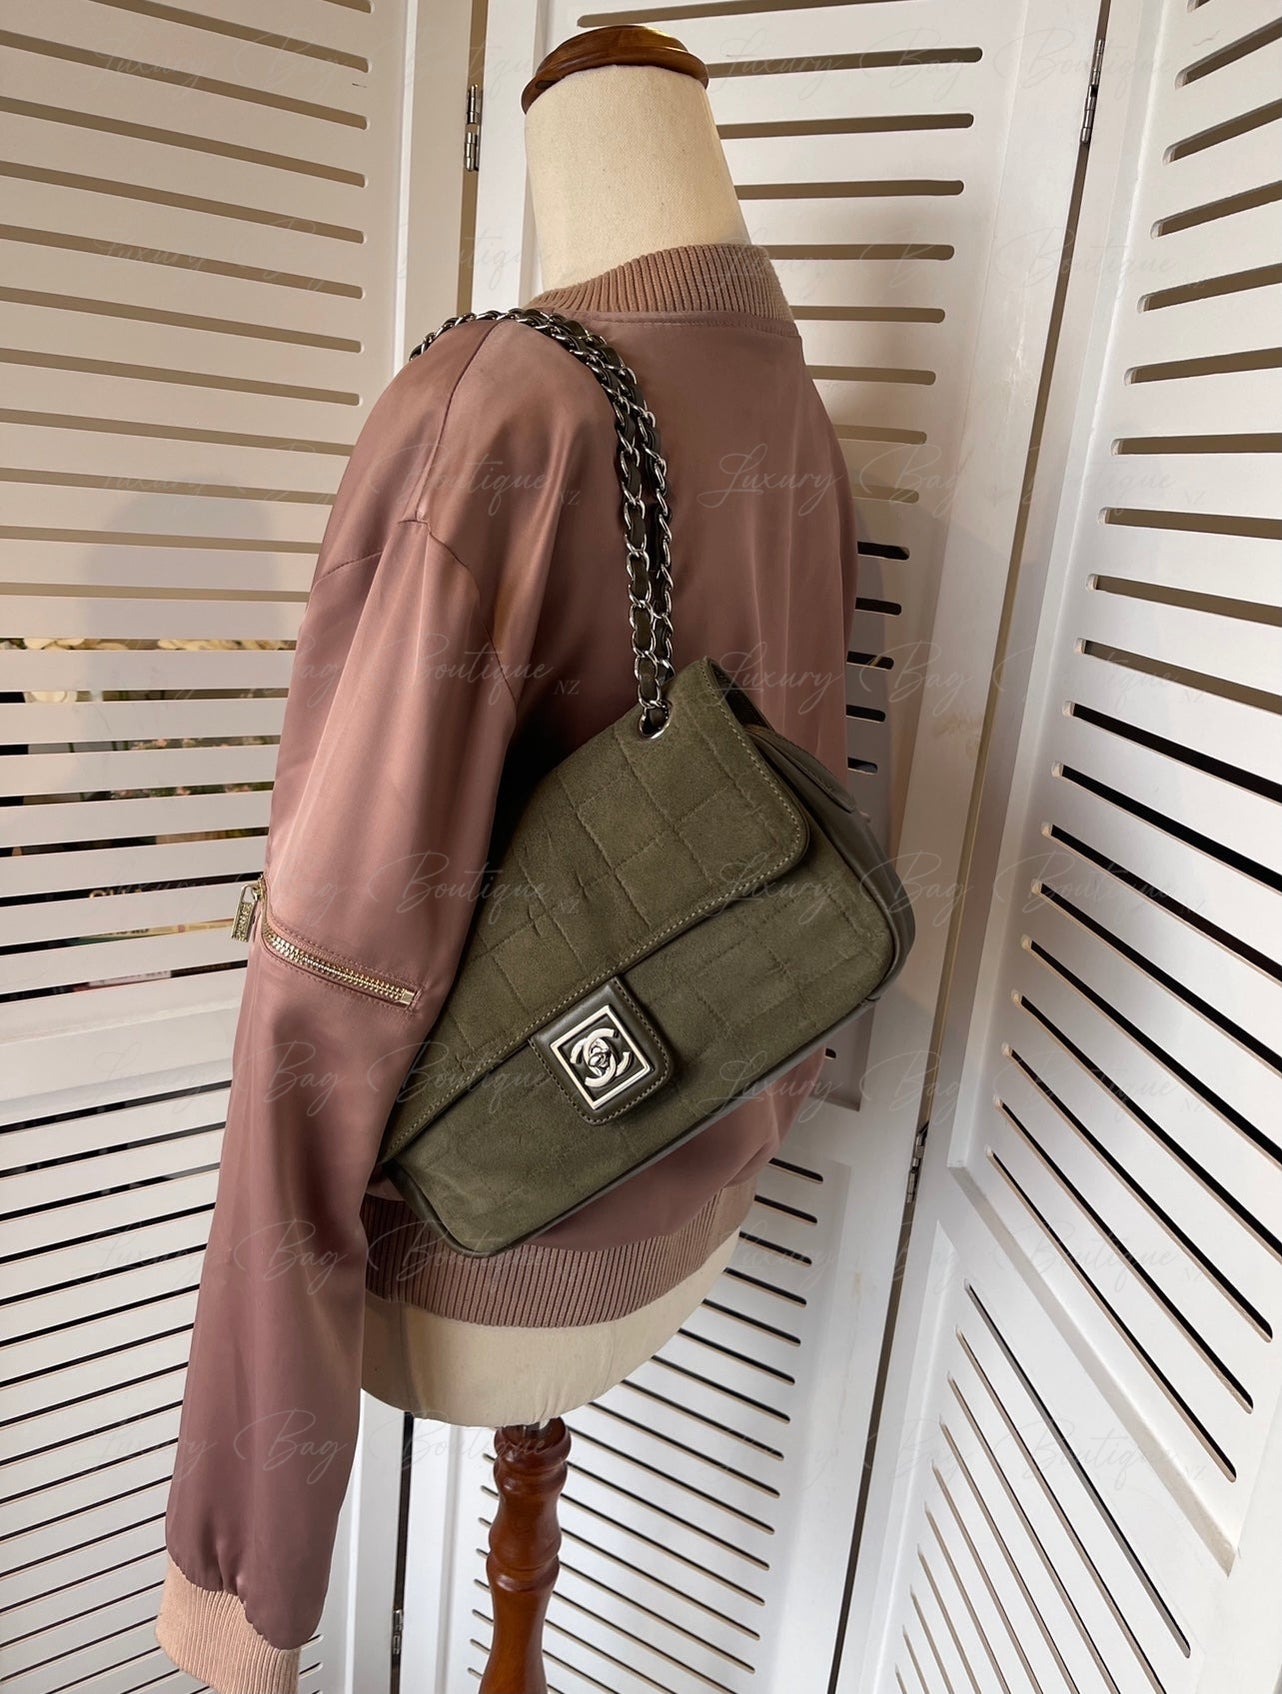 Chanel Single Flap Sport Bag Olive Green – luxurybagboutiquenz